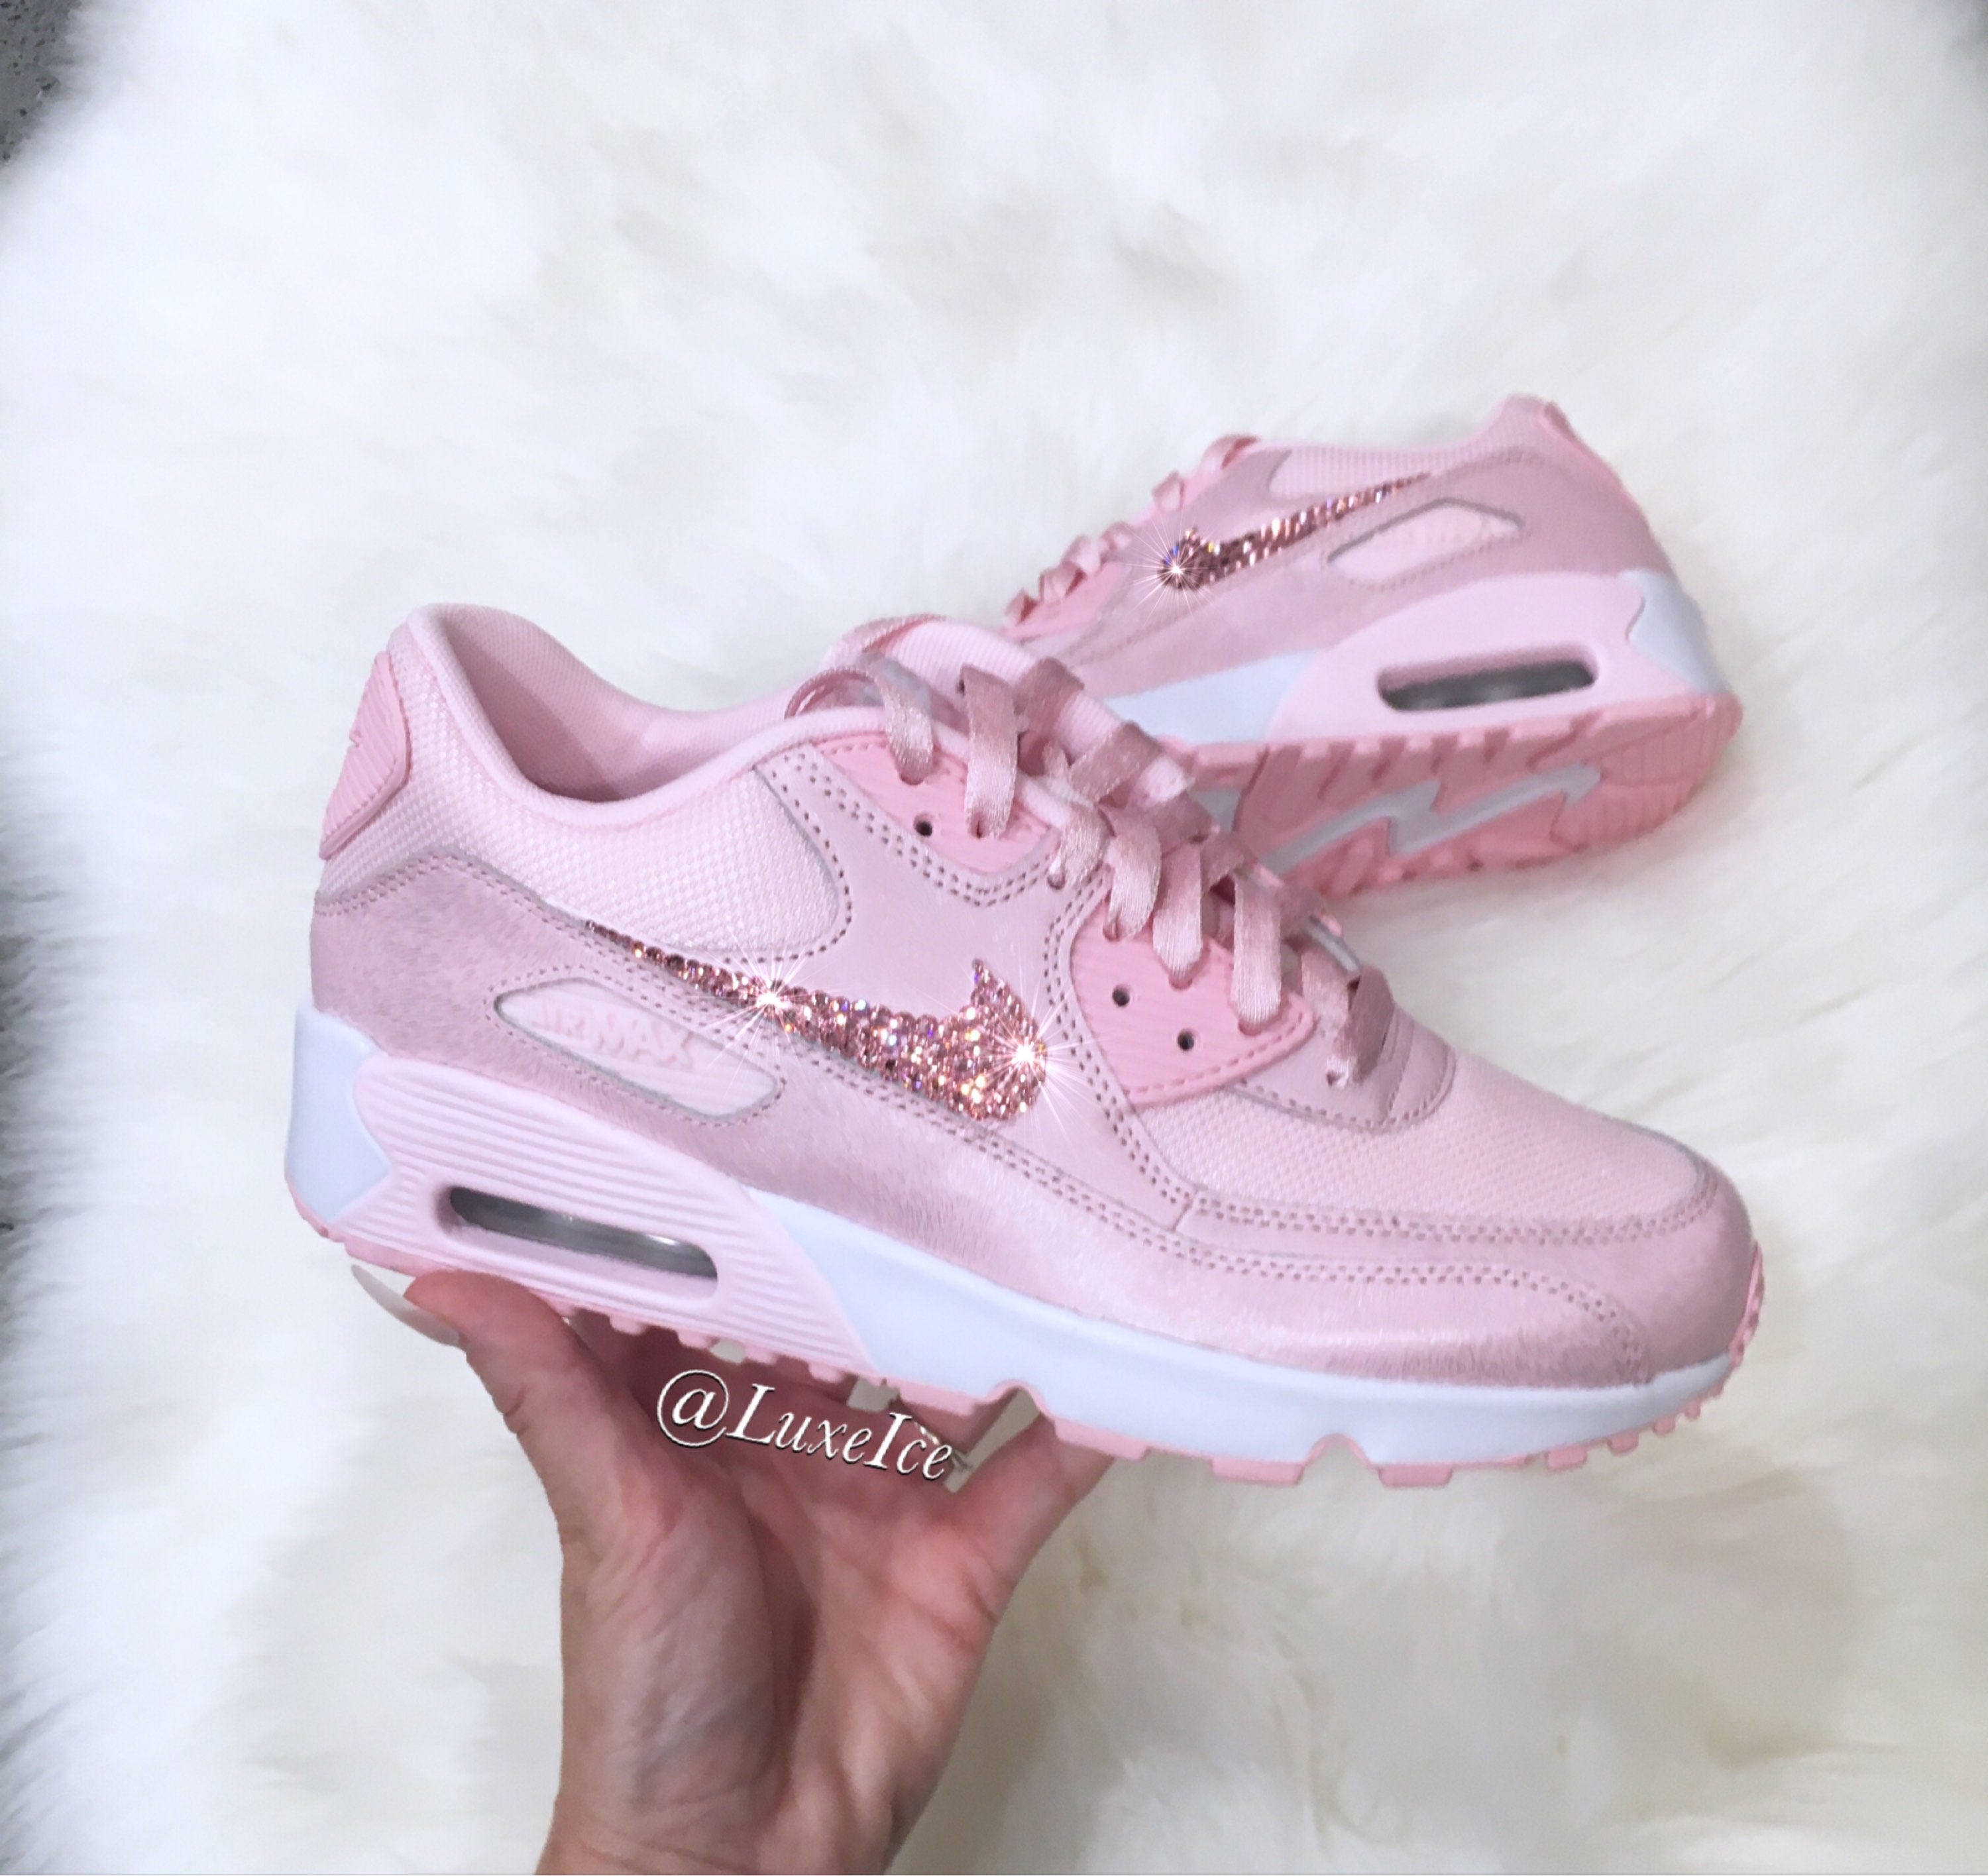 Nike Air Max 90 Prism Pink/White customized with Light Pink